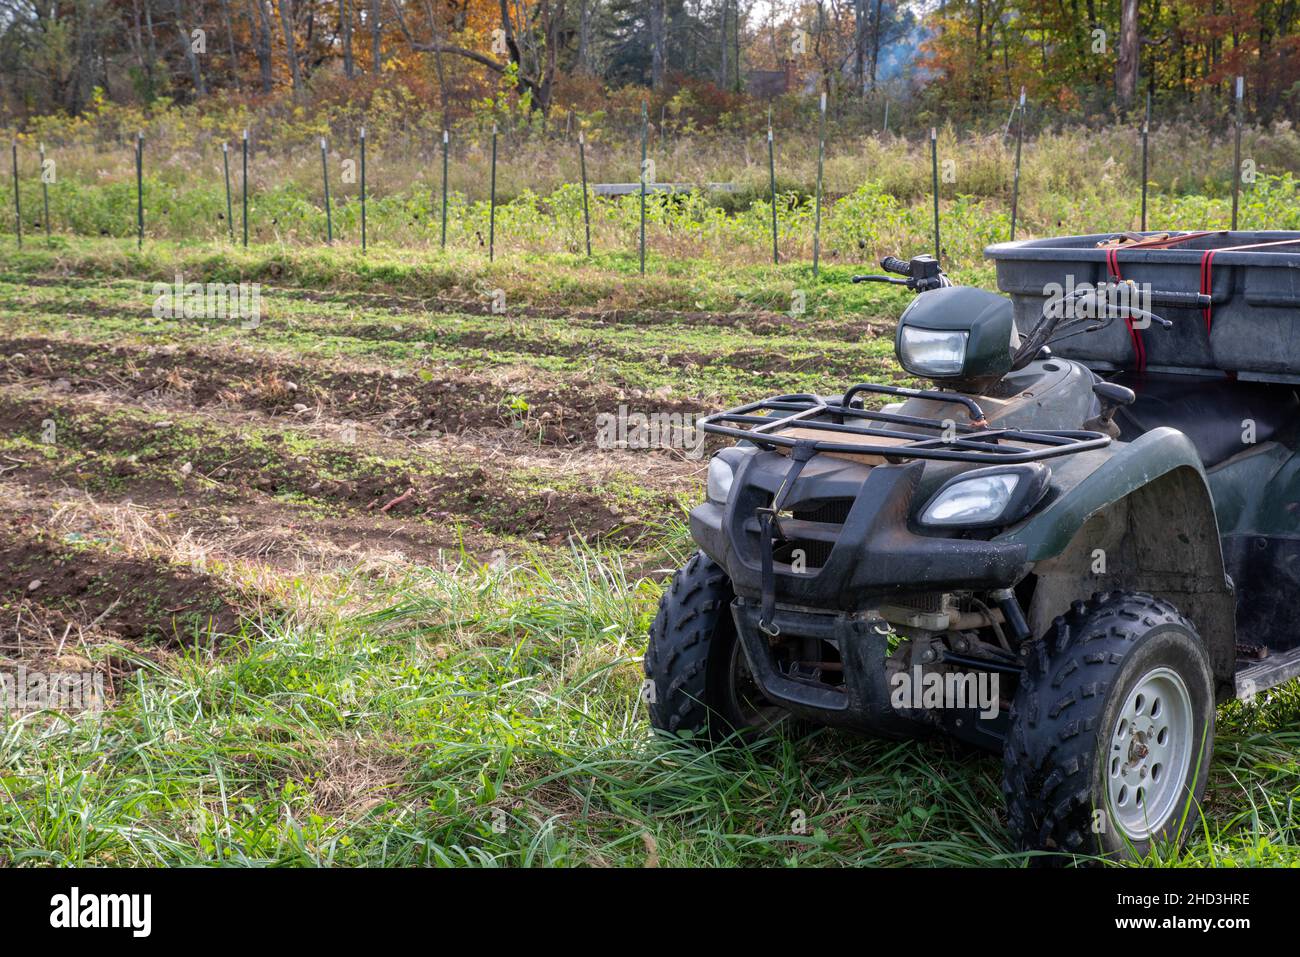 Off road vehicle by a vegetable garden with autumn trees background Stock Photo